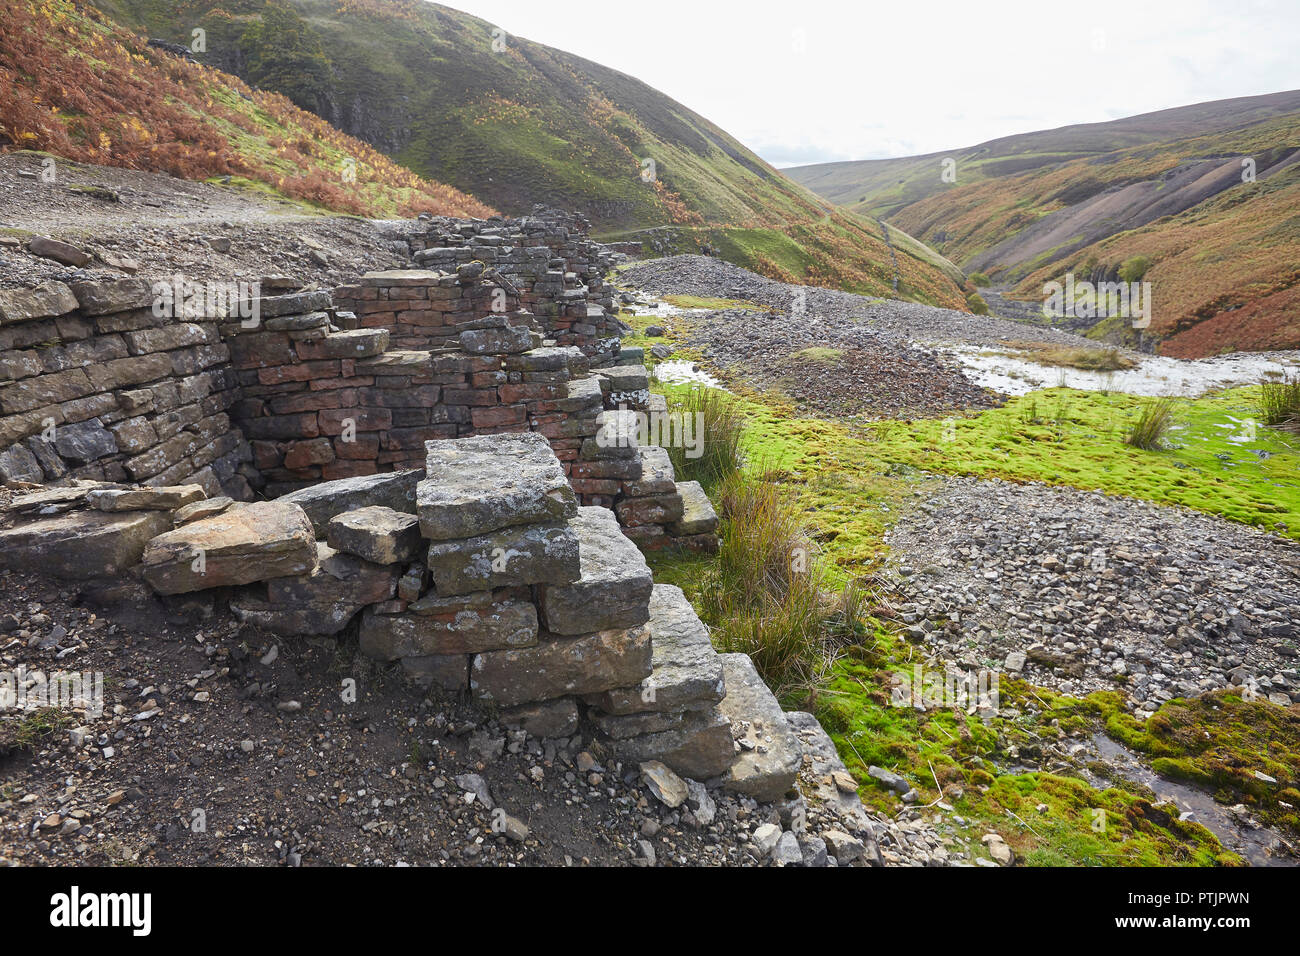 Remains of the bouse teams next to the Bunting mine, part of the once thriving lead mining industry, upper Gunnerside Ghyll Gill, Yorkshire Dales, UK Stock Photo